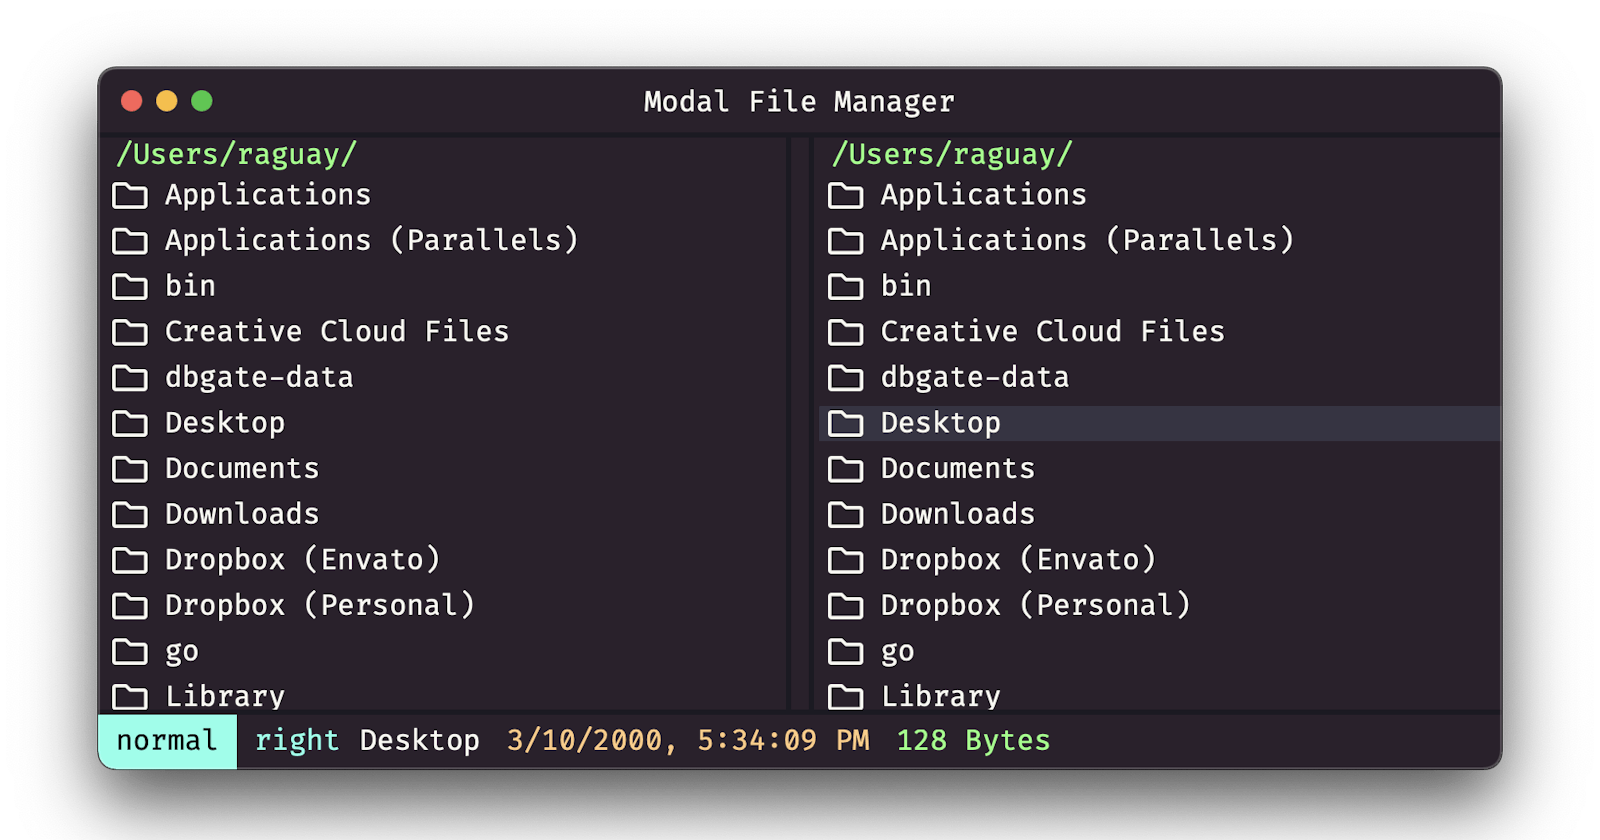 First Release of the New Modal File Manager